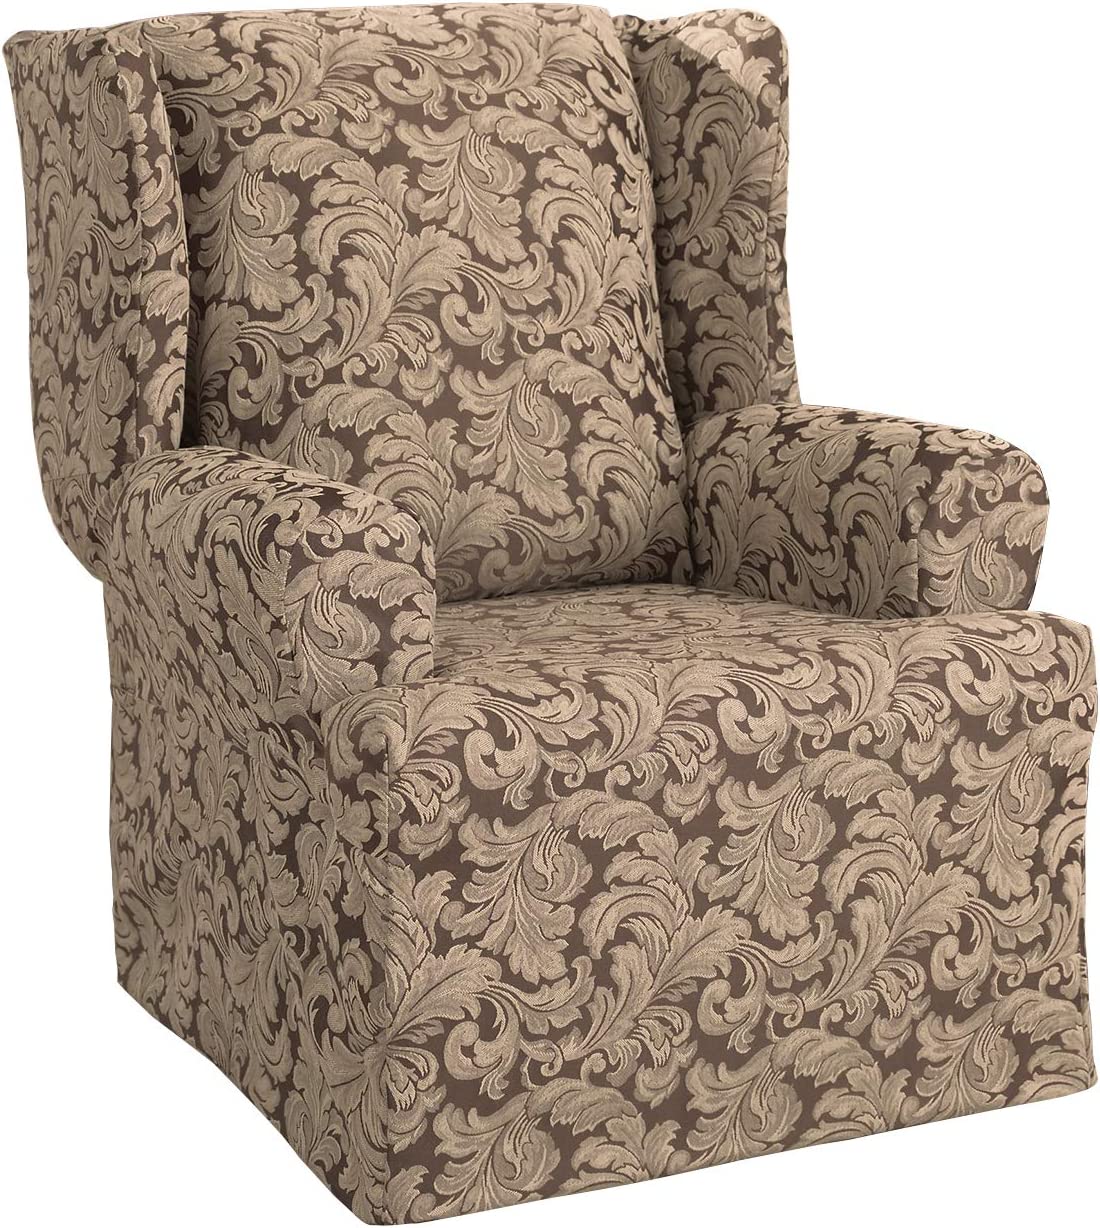 Surefit Scroll Damask Box Cushion Wing Chair One Piece Slipcover, Relaxed Fit, Cotton/Polyester, Machine Washable, Brown - image 1 of 4